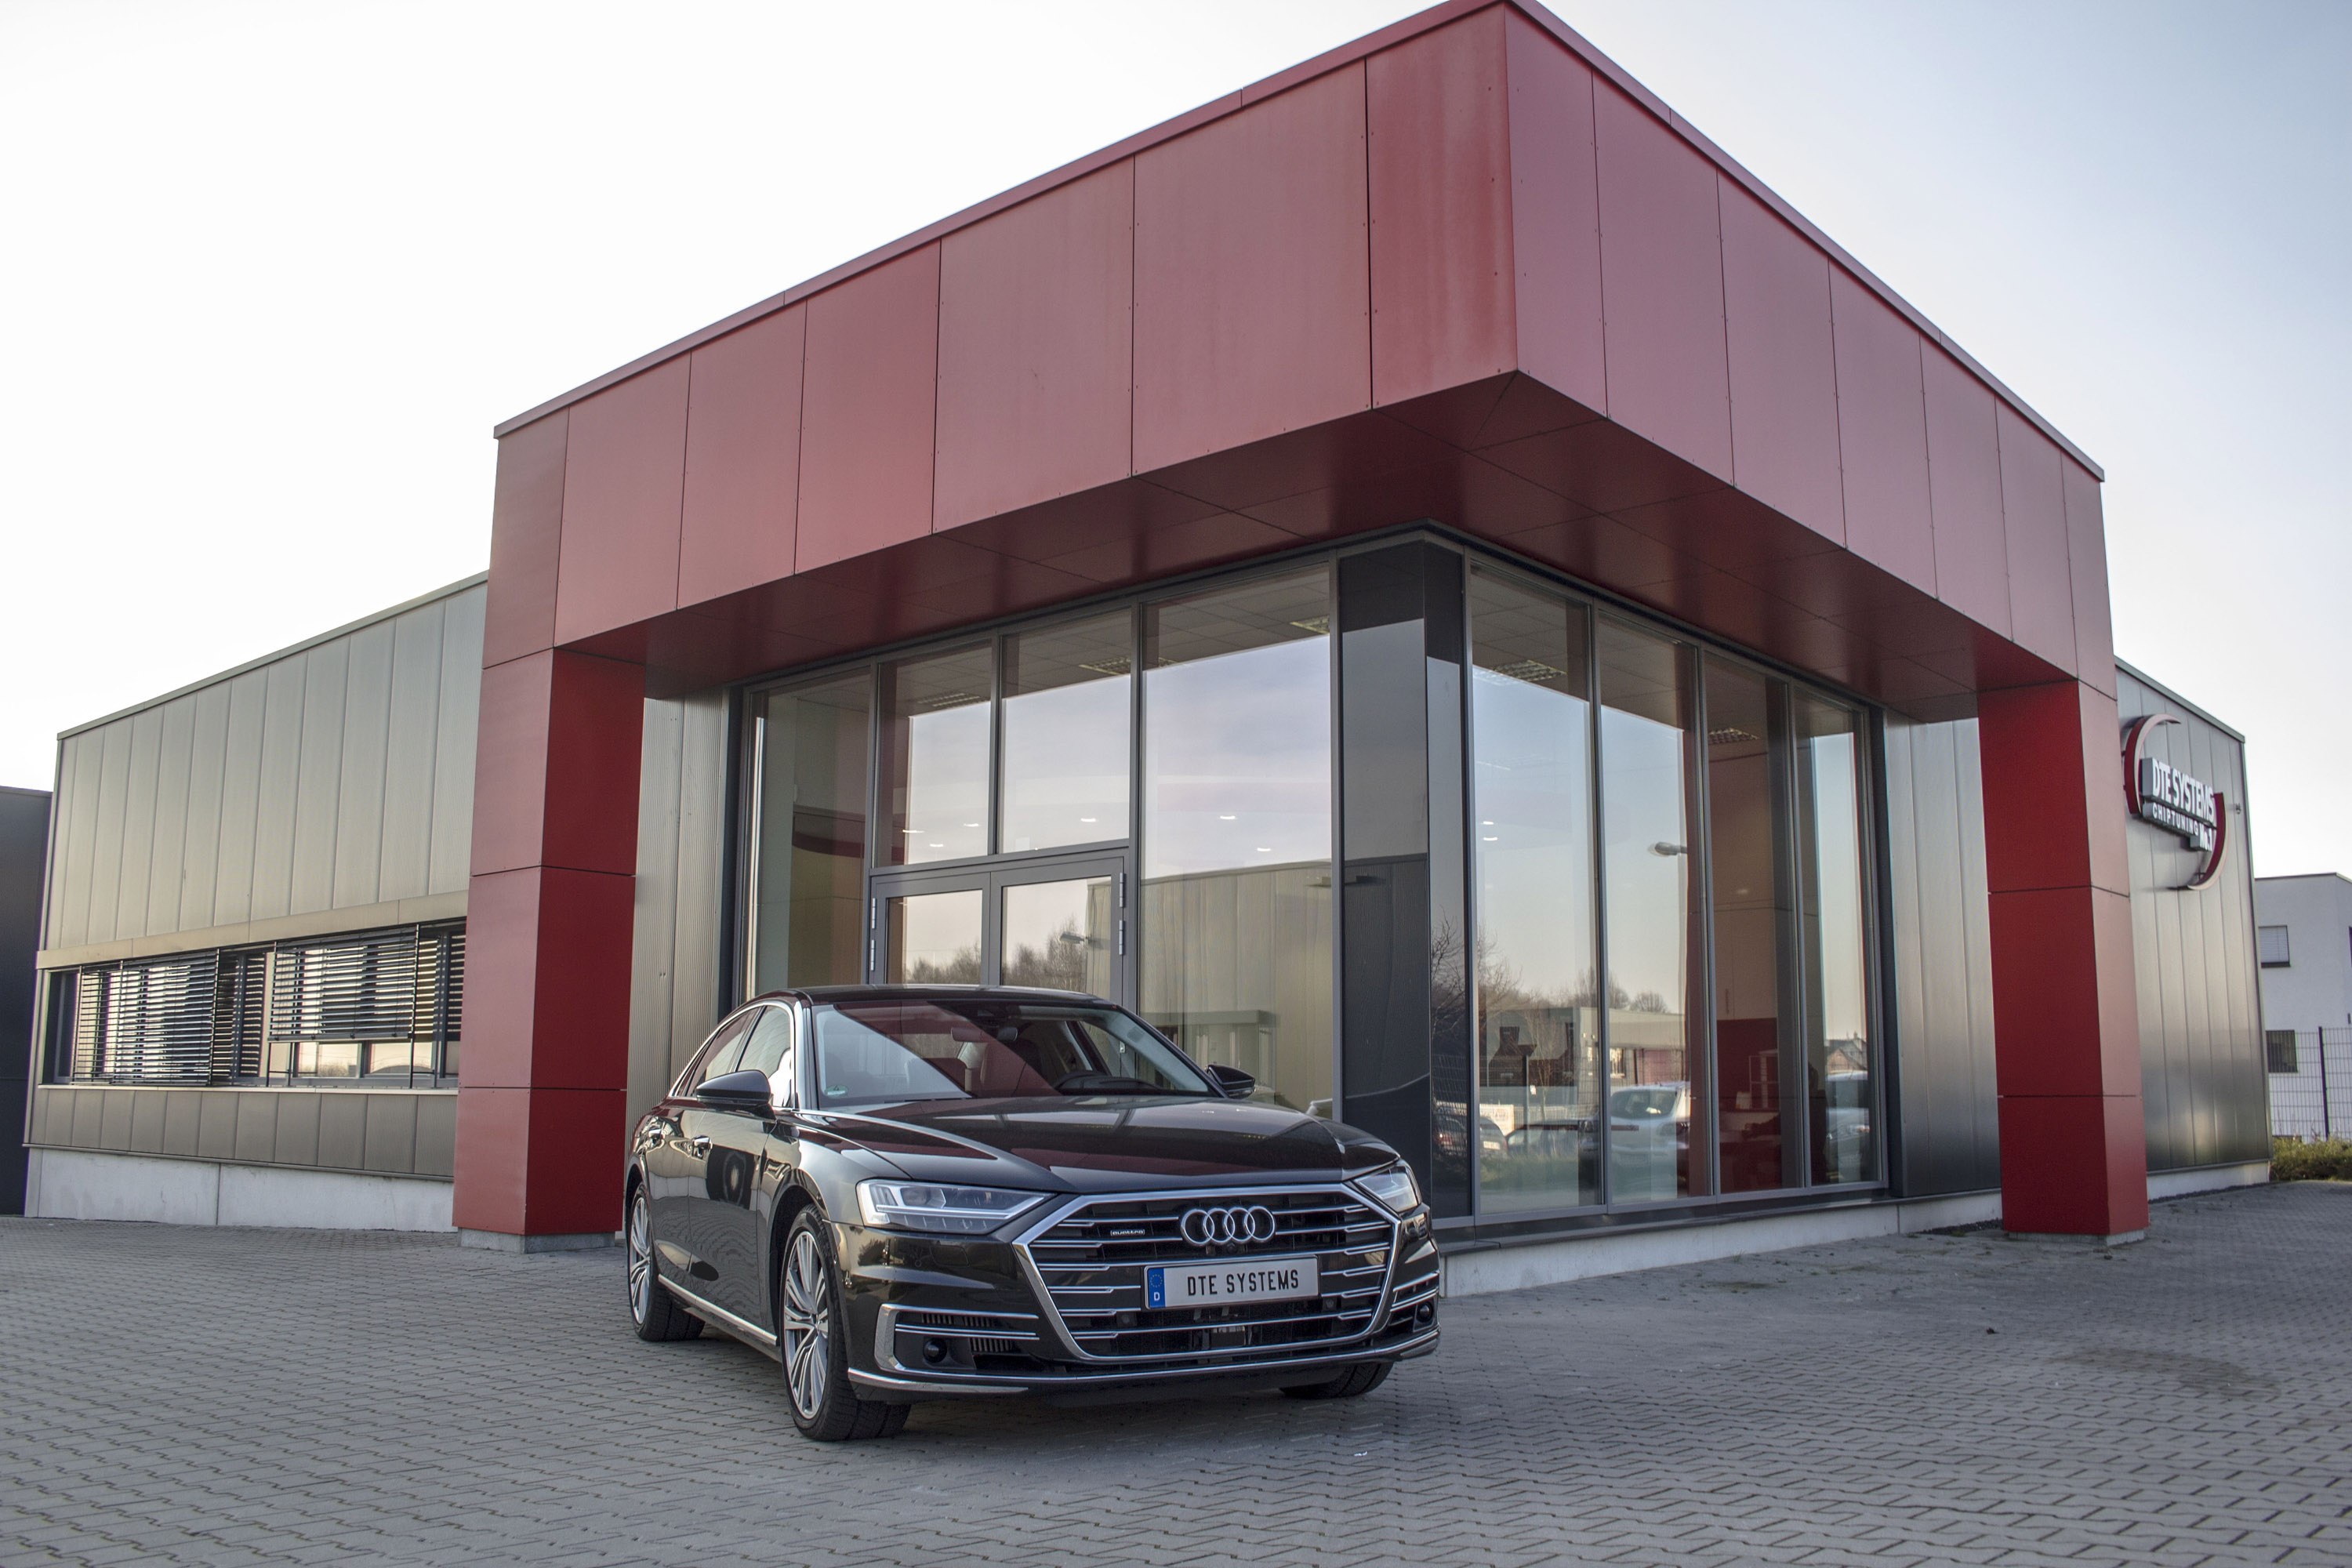 DTE Systems Audi A8